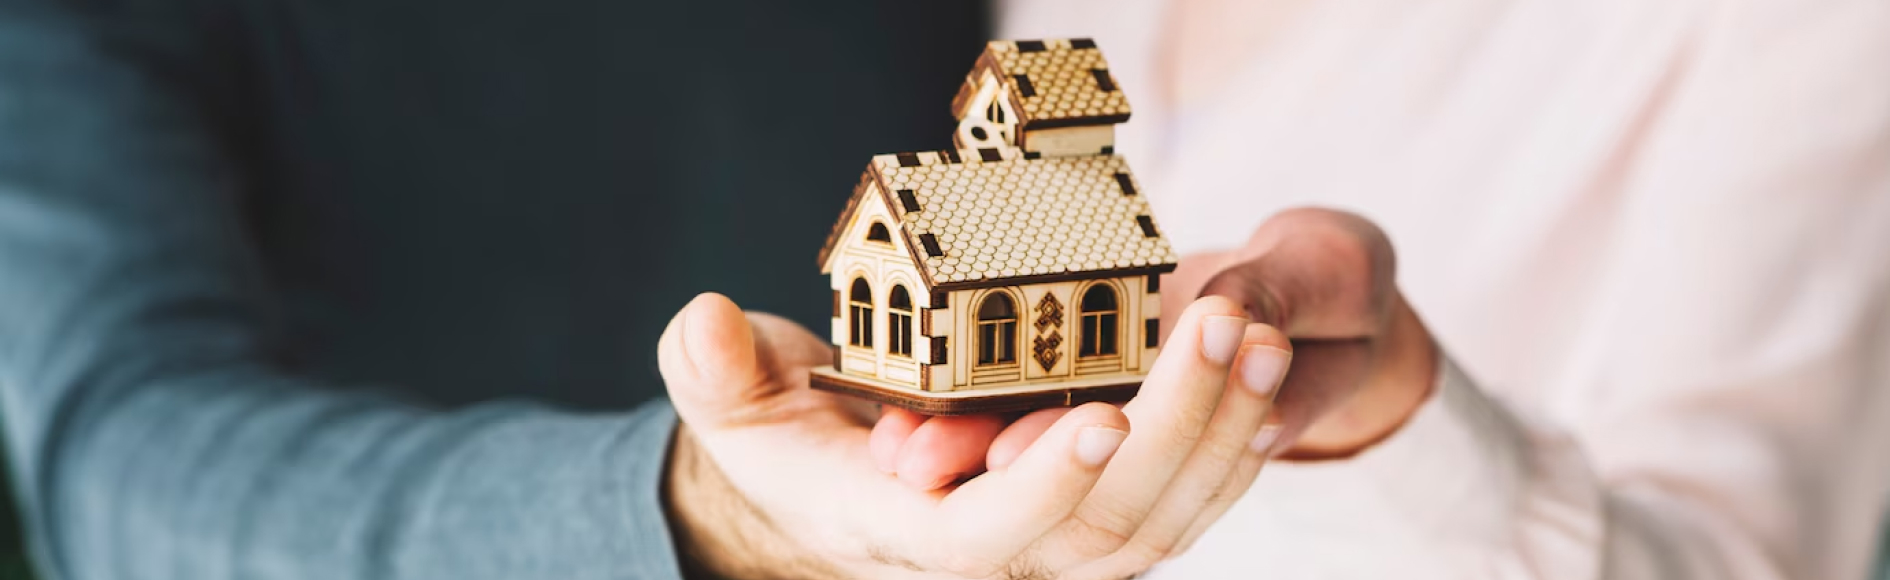 7 Myths About Stratford Home Insurance - Orr Insurance & Investment